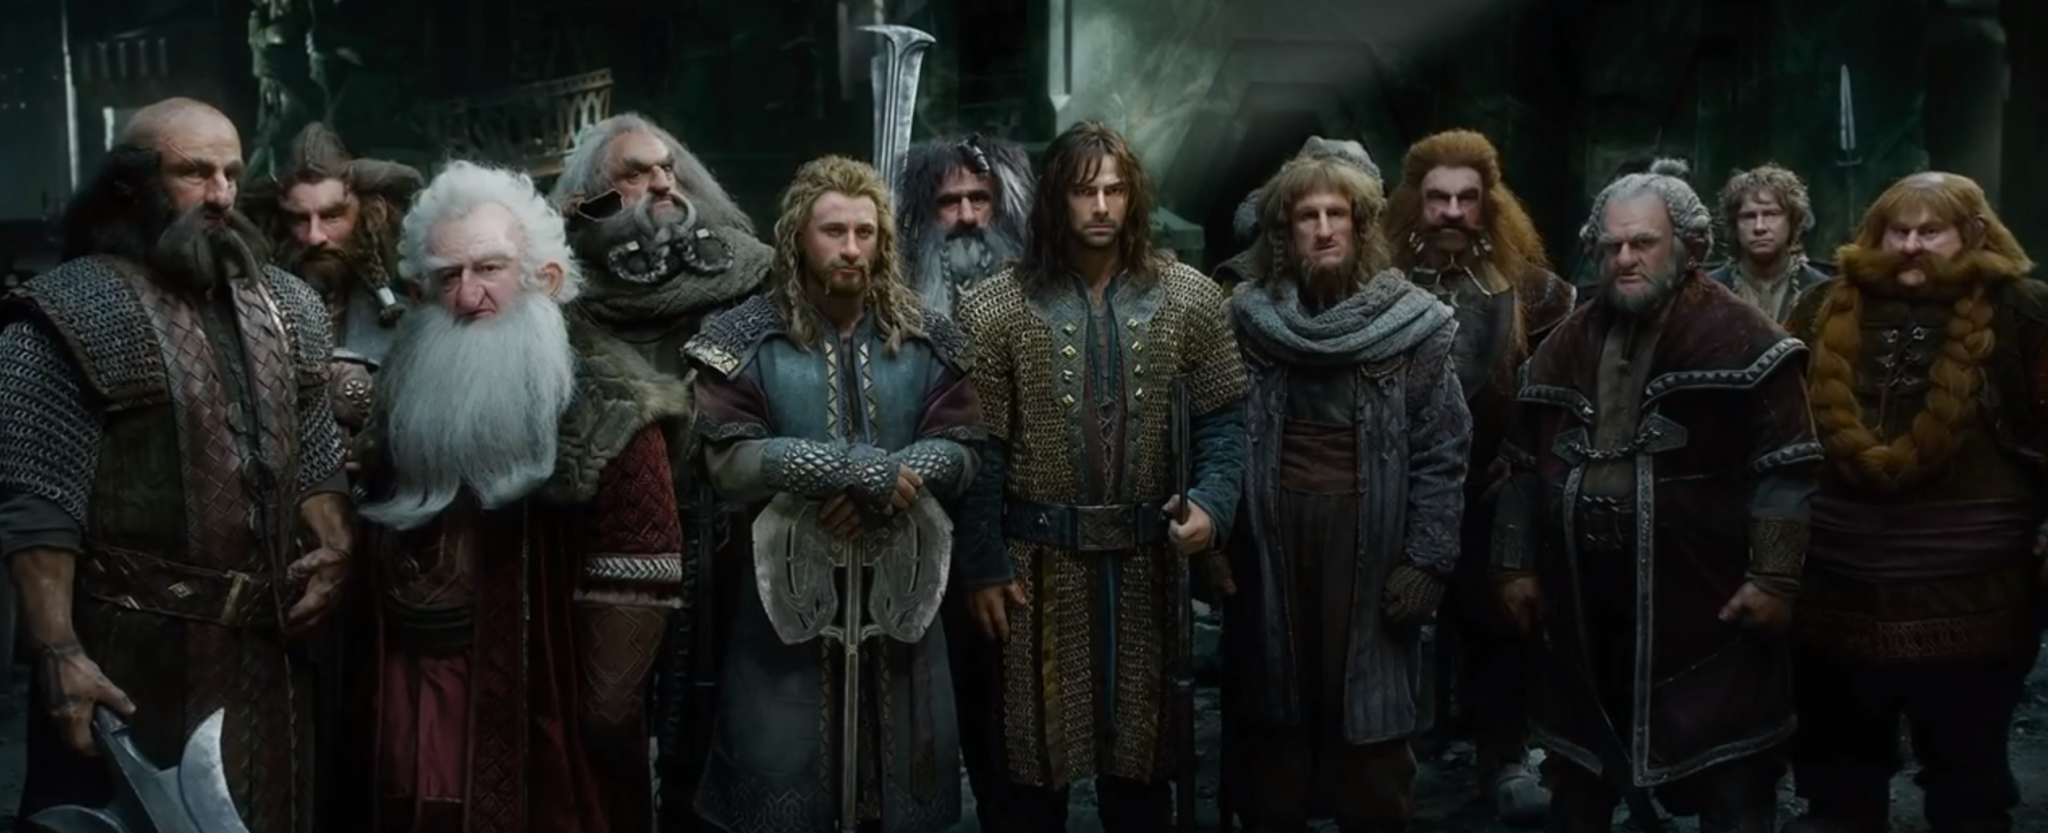 The Hobbit: The Battle of the Five Armies Trailer released.